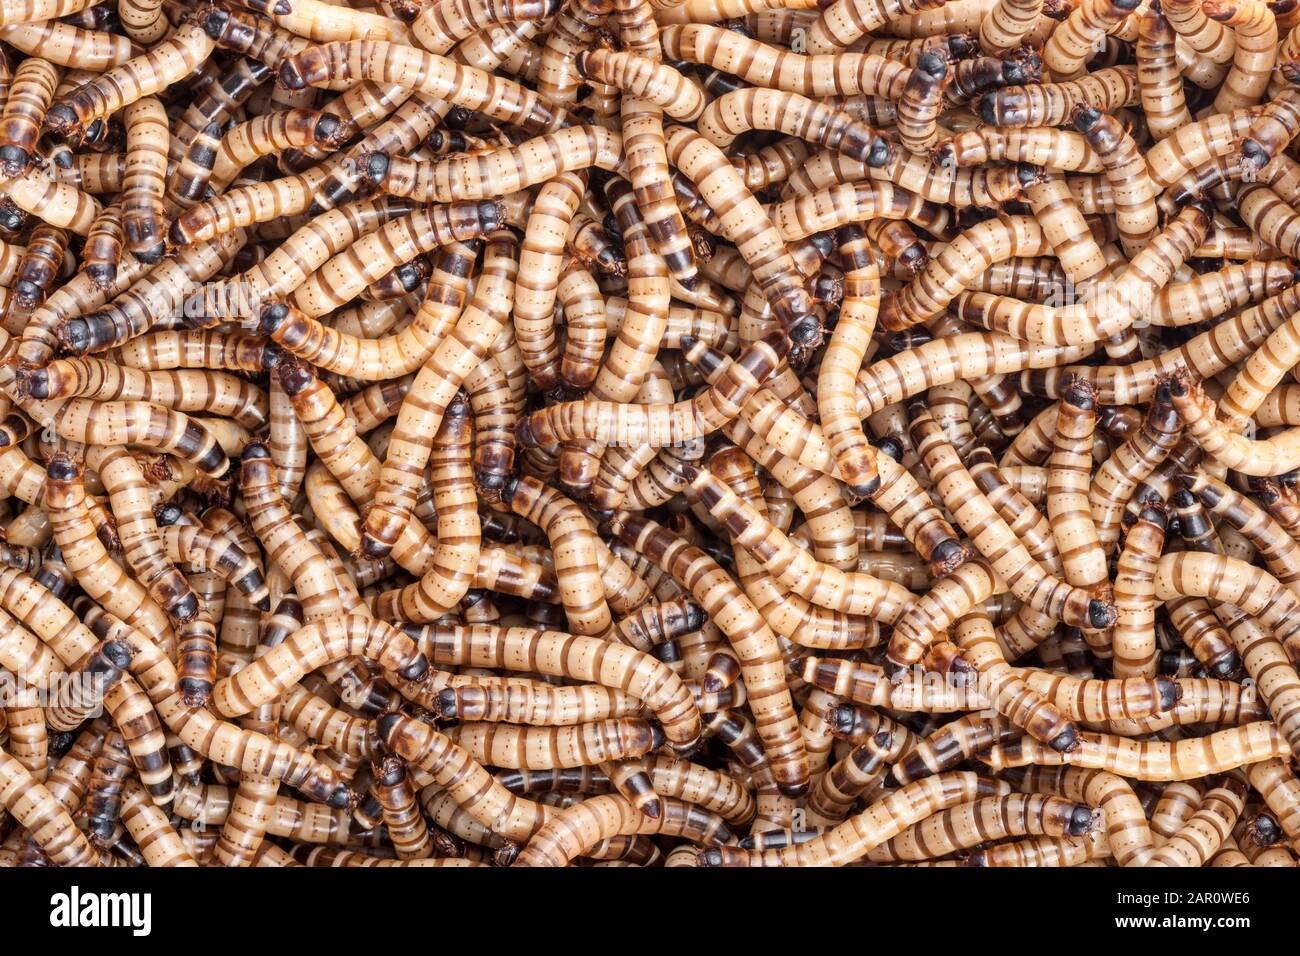 Large mass of SUPERWORMS (Zophobas morio) Used for reptile food. Stock Photo